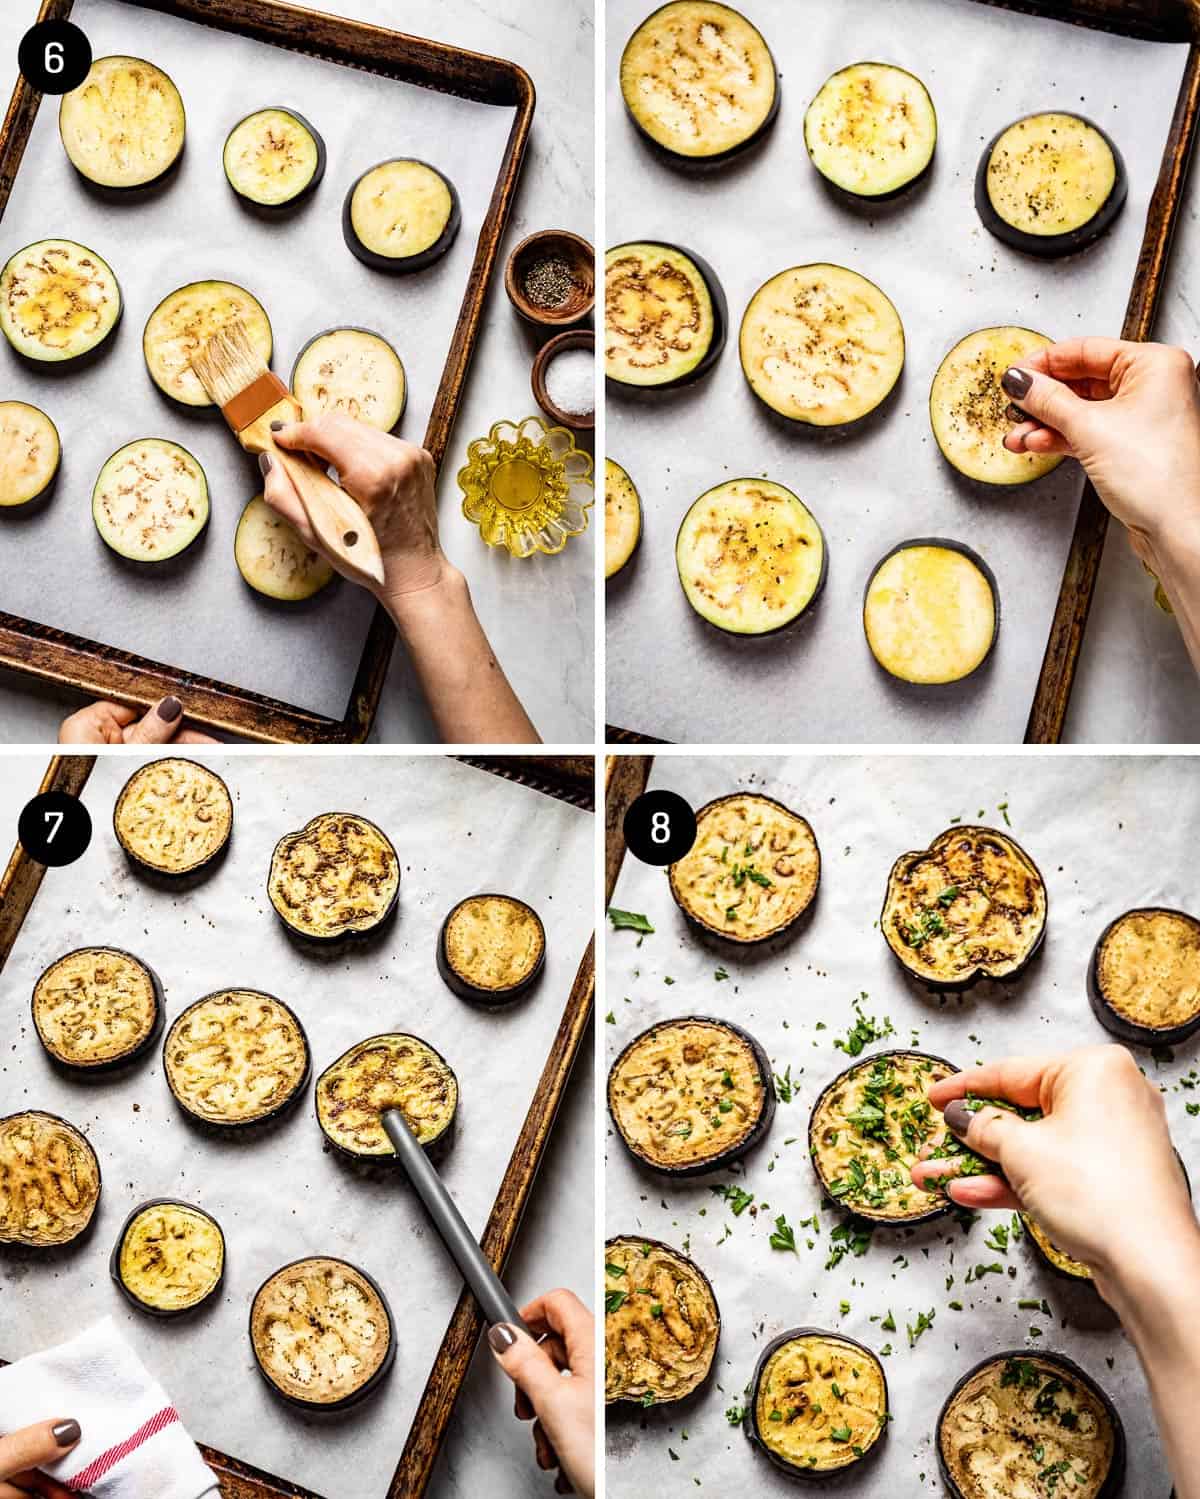 a collage of images showing how to prepare eggplant slices for baking